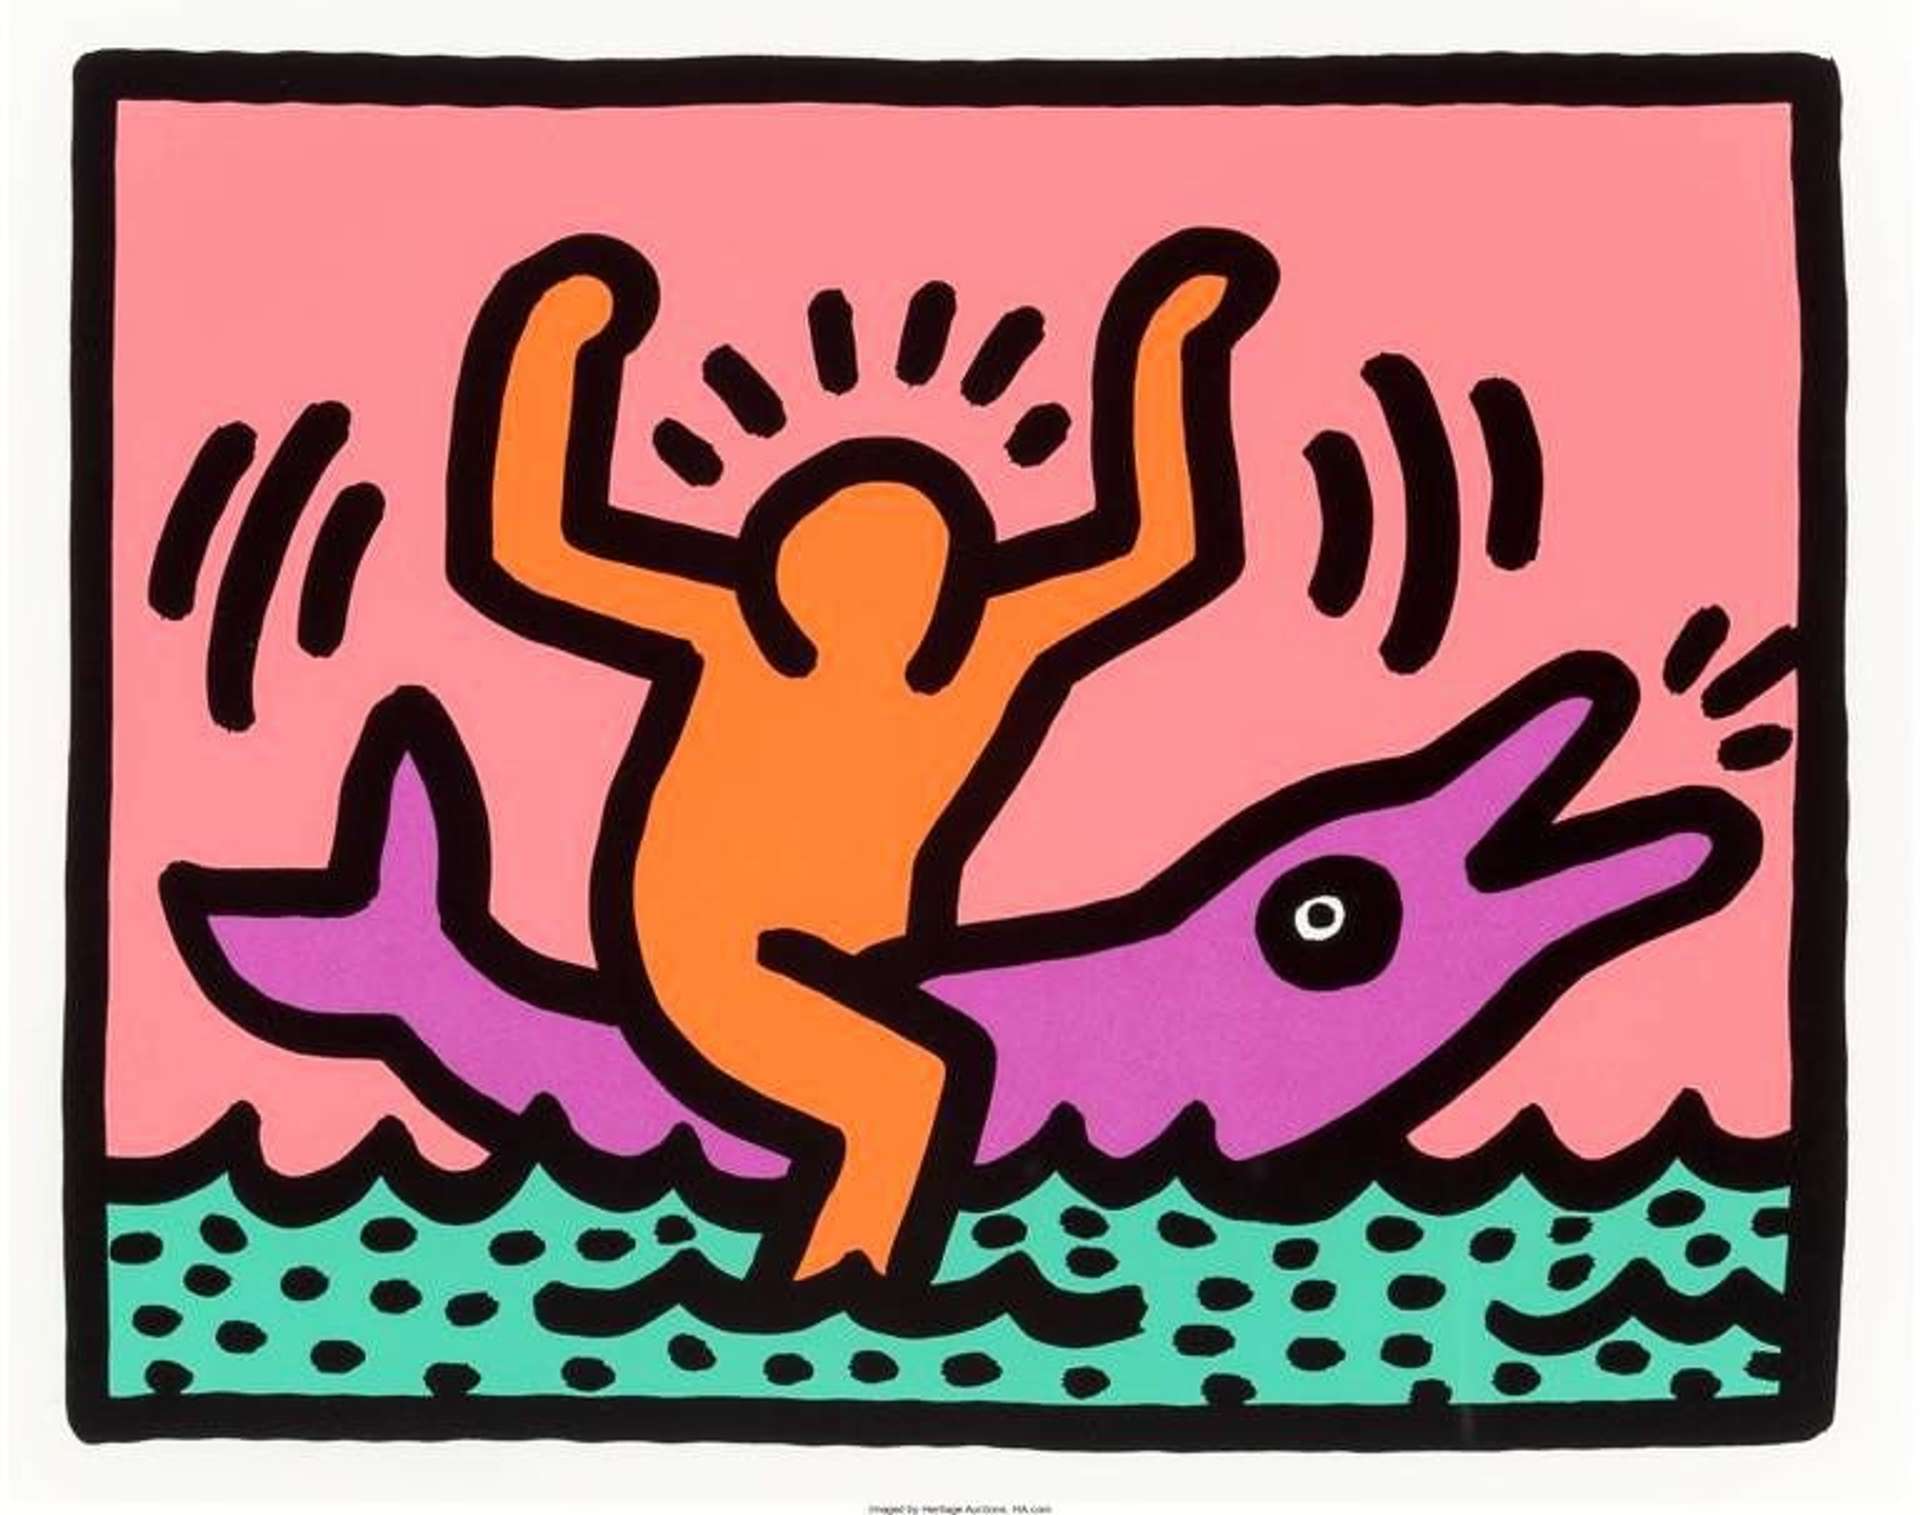 Keith Haring’s Pop Shop V, Plate II. A Pop Art screenprint of an orange character riding a pink dolphin against a pink background. 